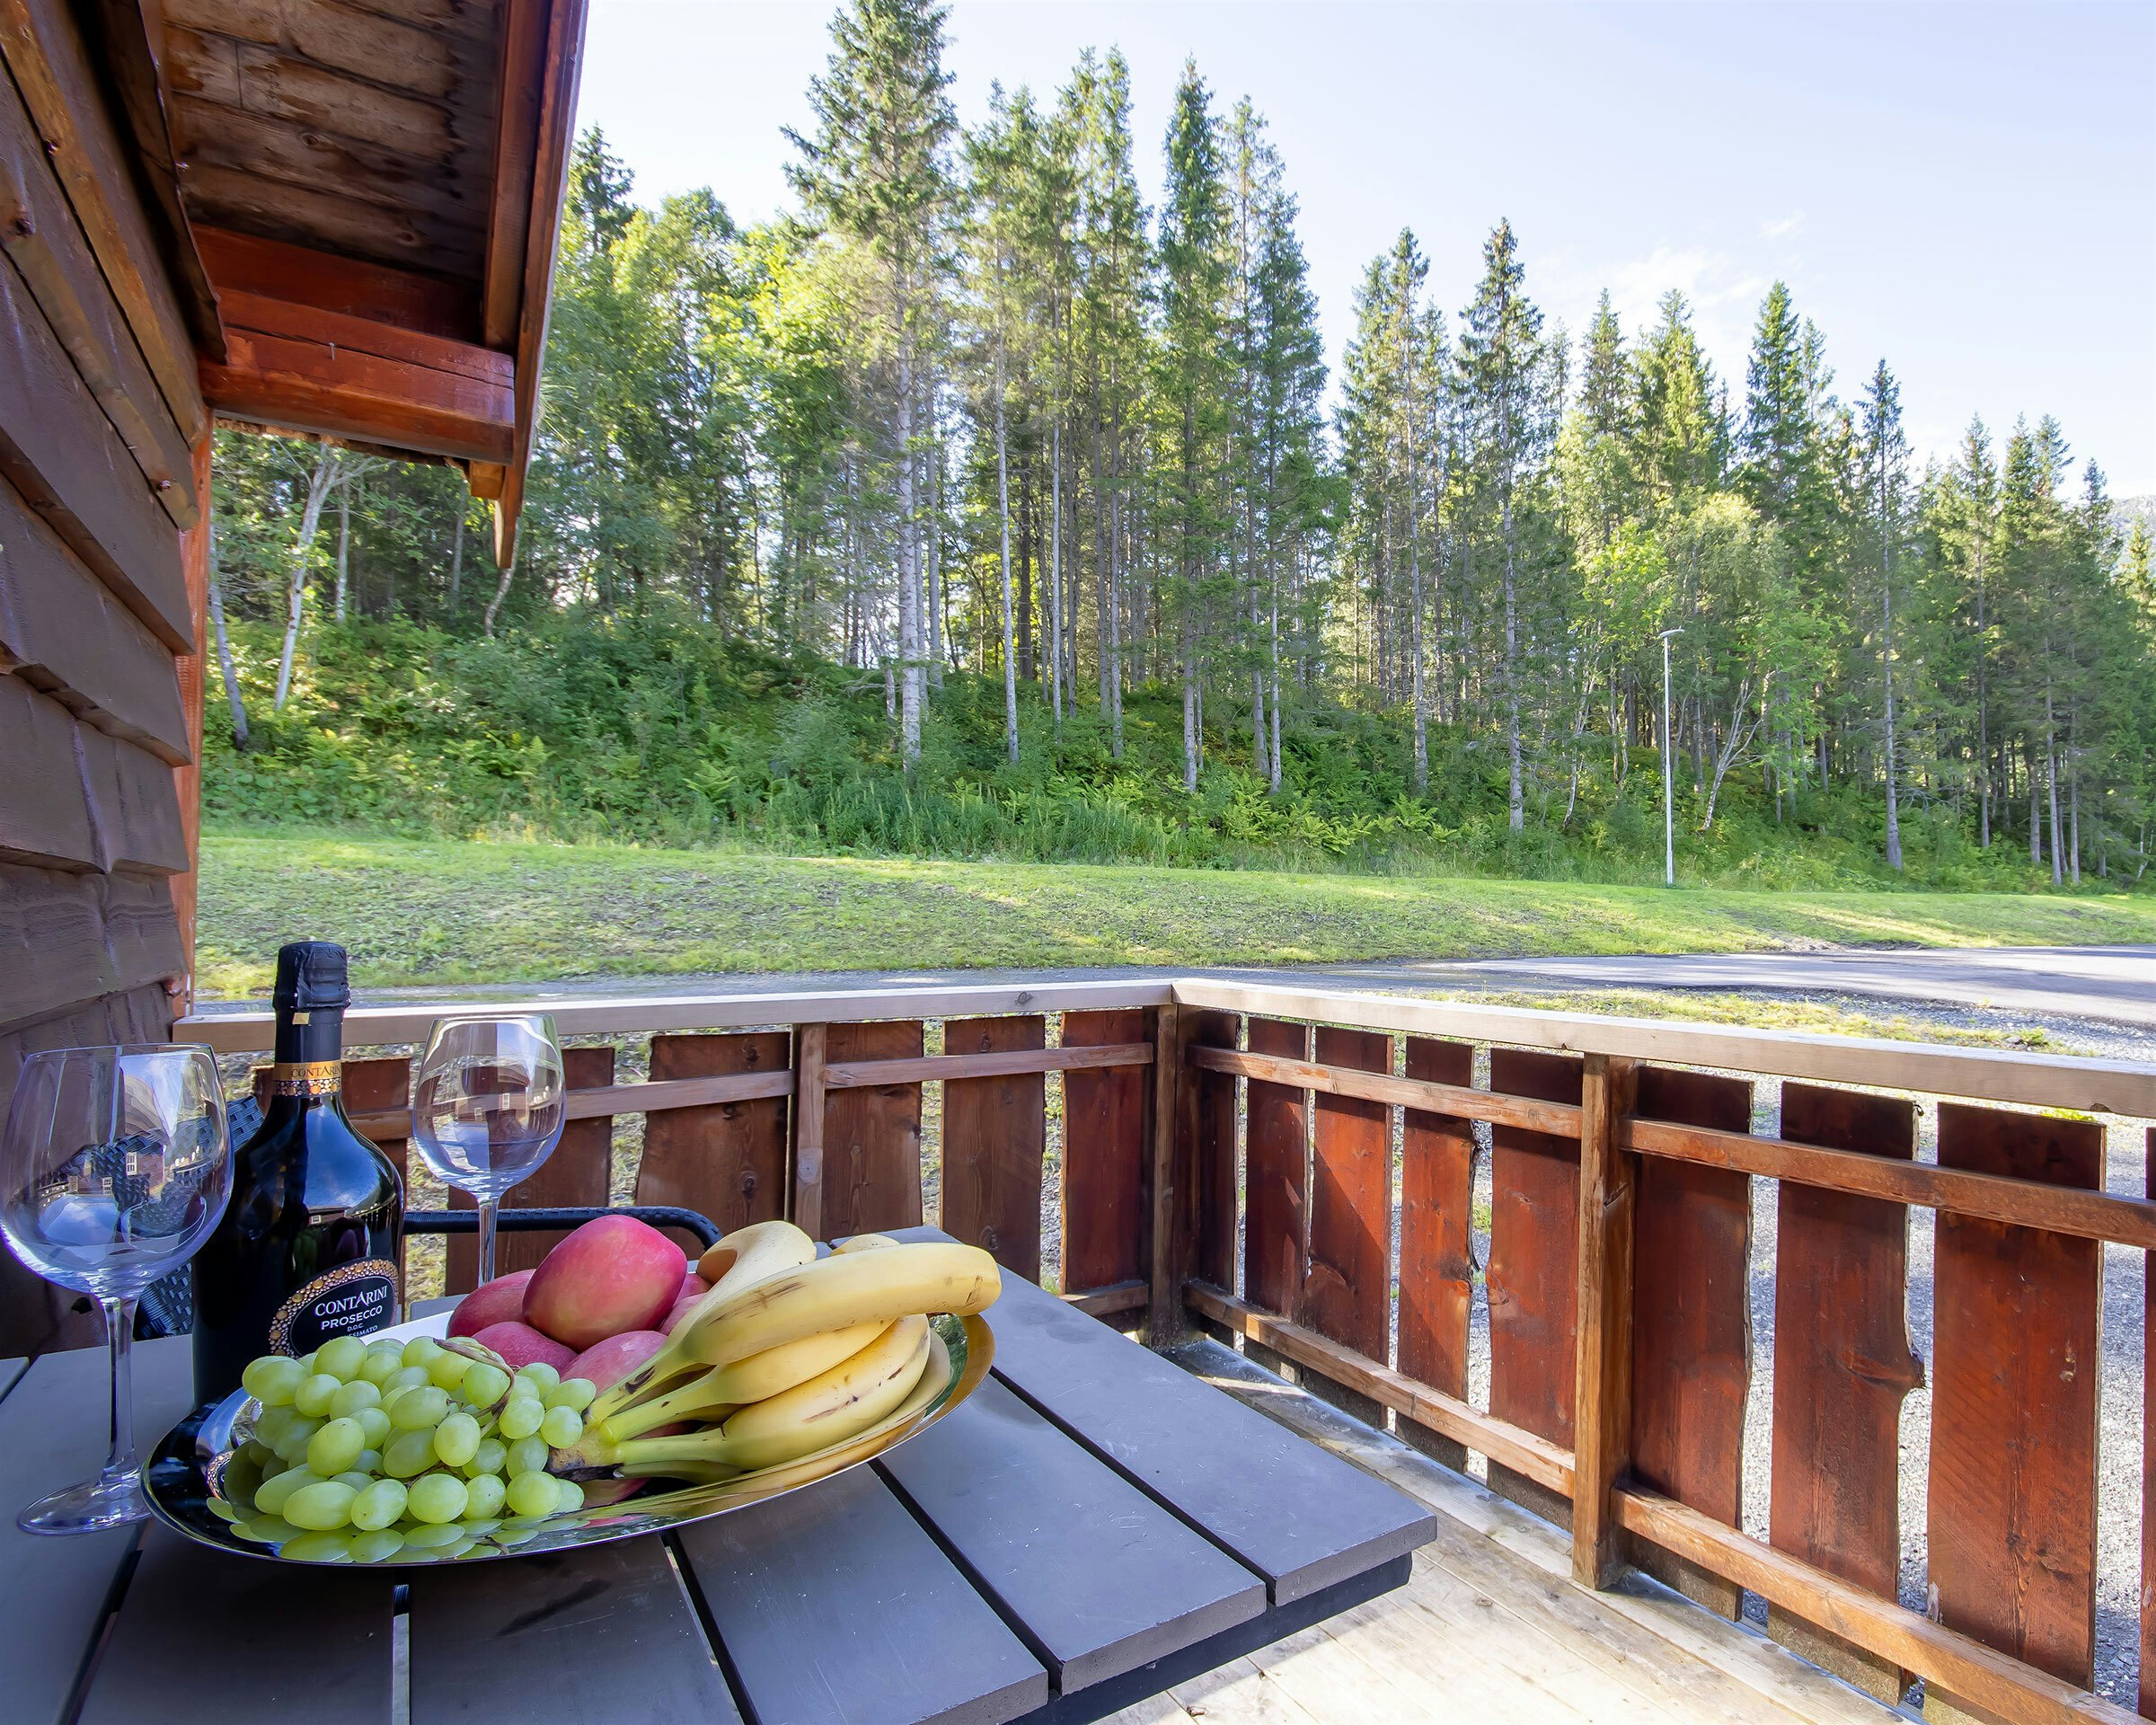 Veranda with view to forest and mountains. A fruit platter is on the table. Photo